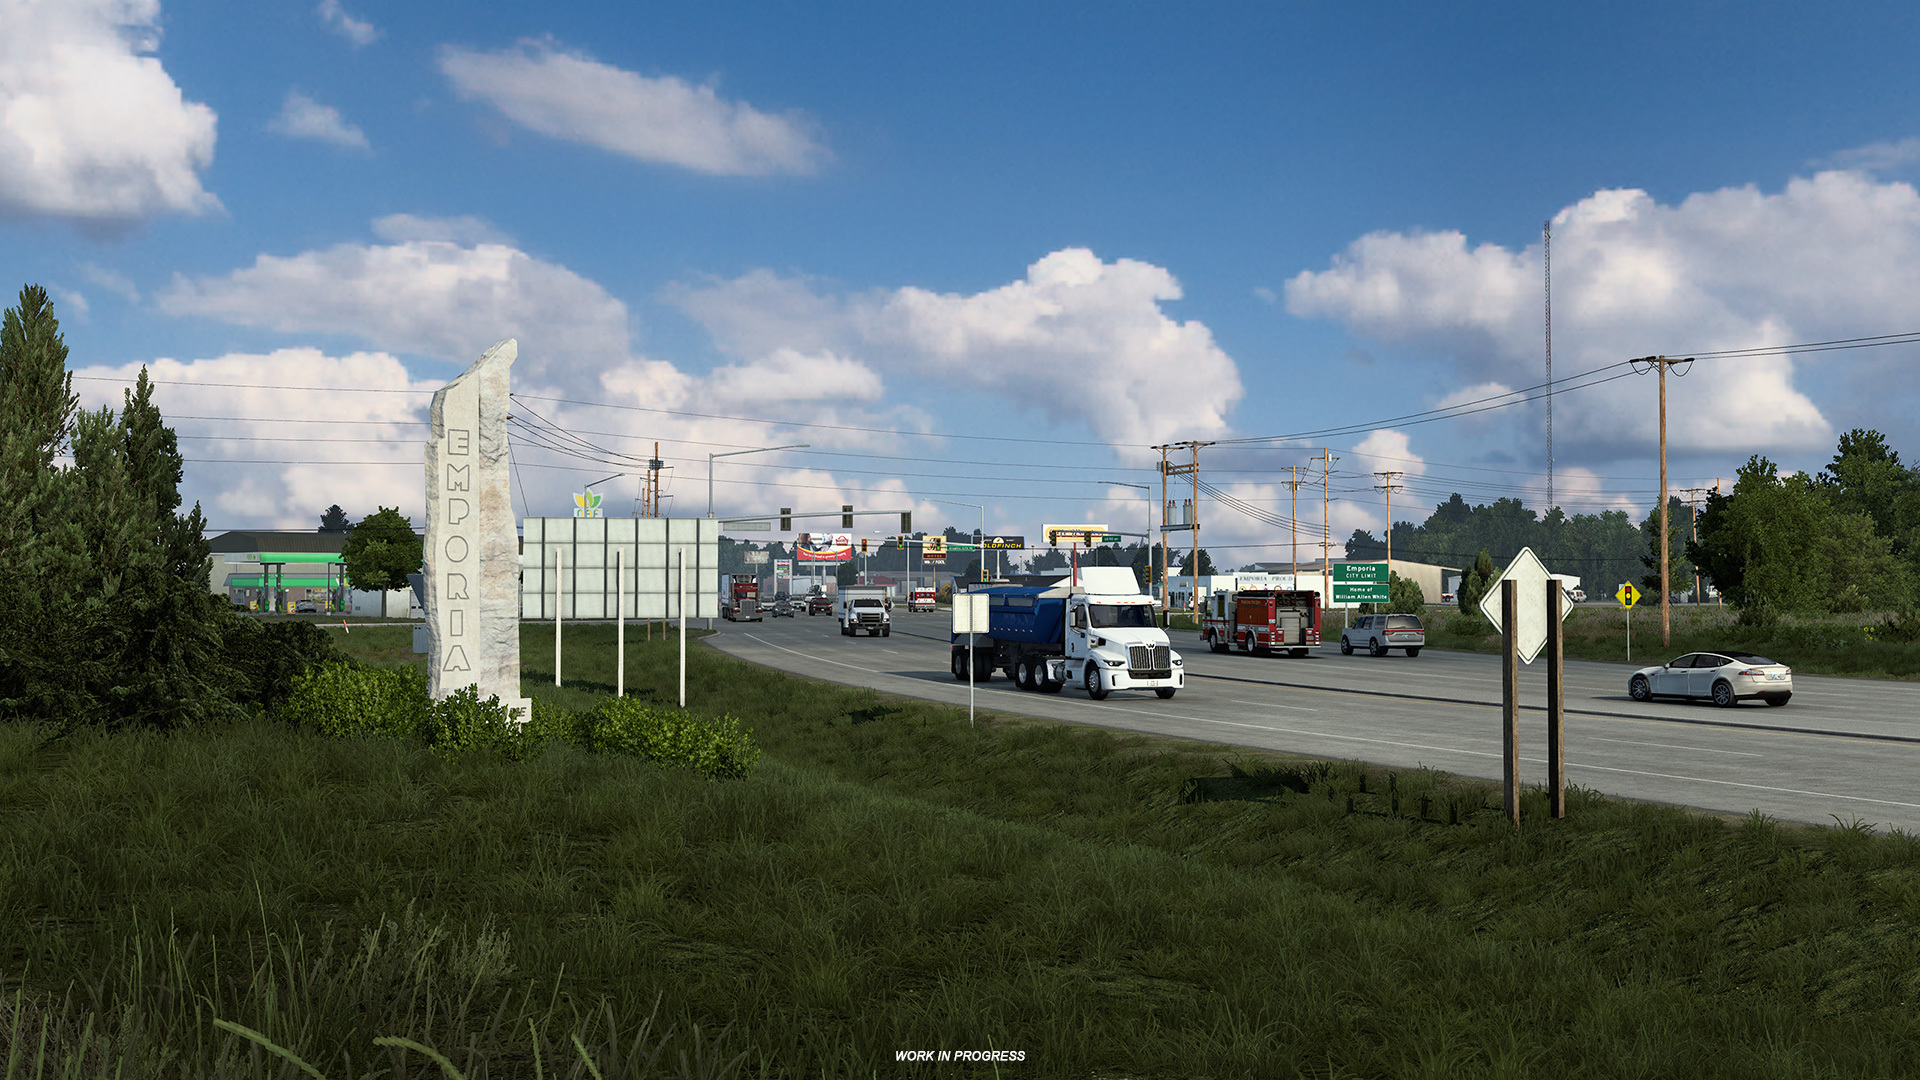 Euro Truck Simulator 2 Review - No Shortage Of Drivers Here